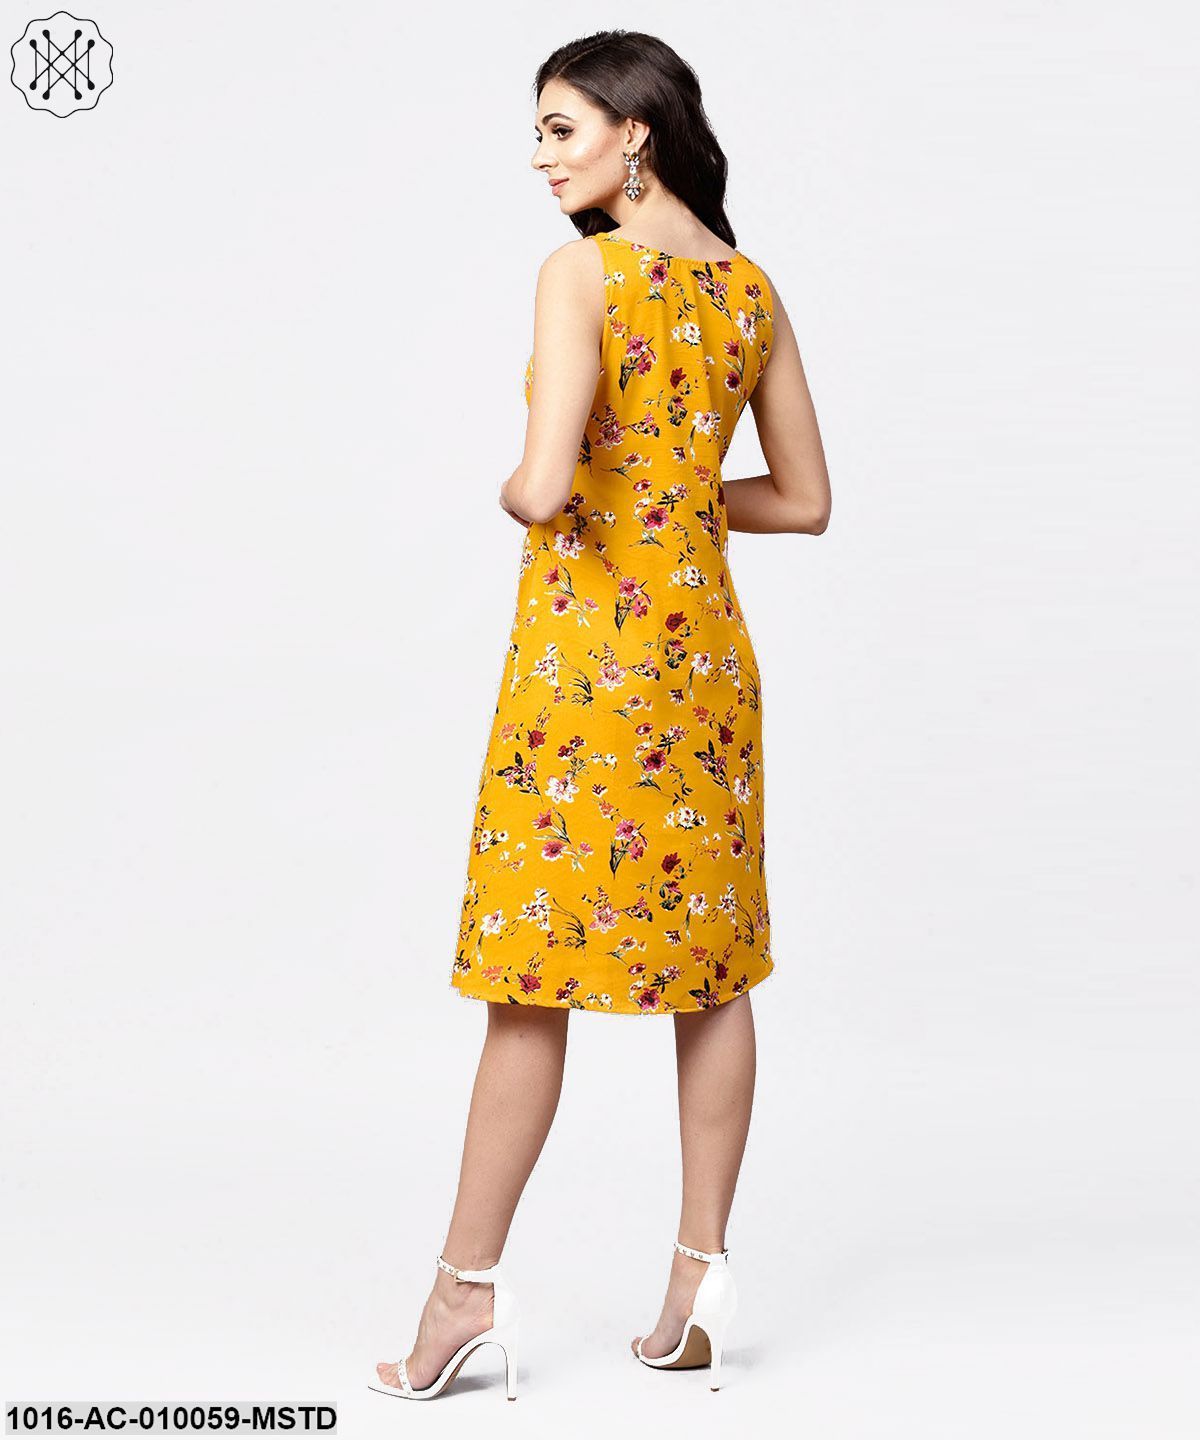 Mustard Floral Printed Sleeveless Dress With Key Hole Neck